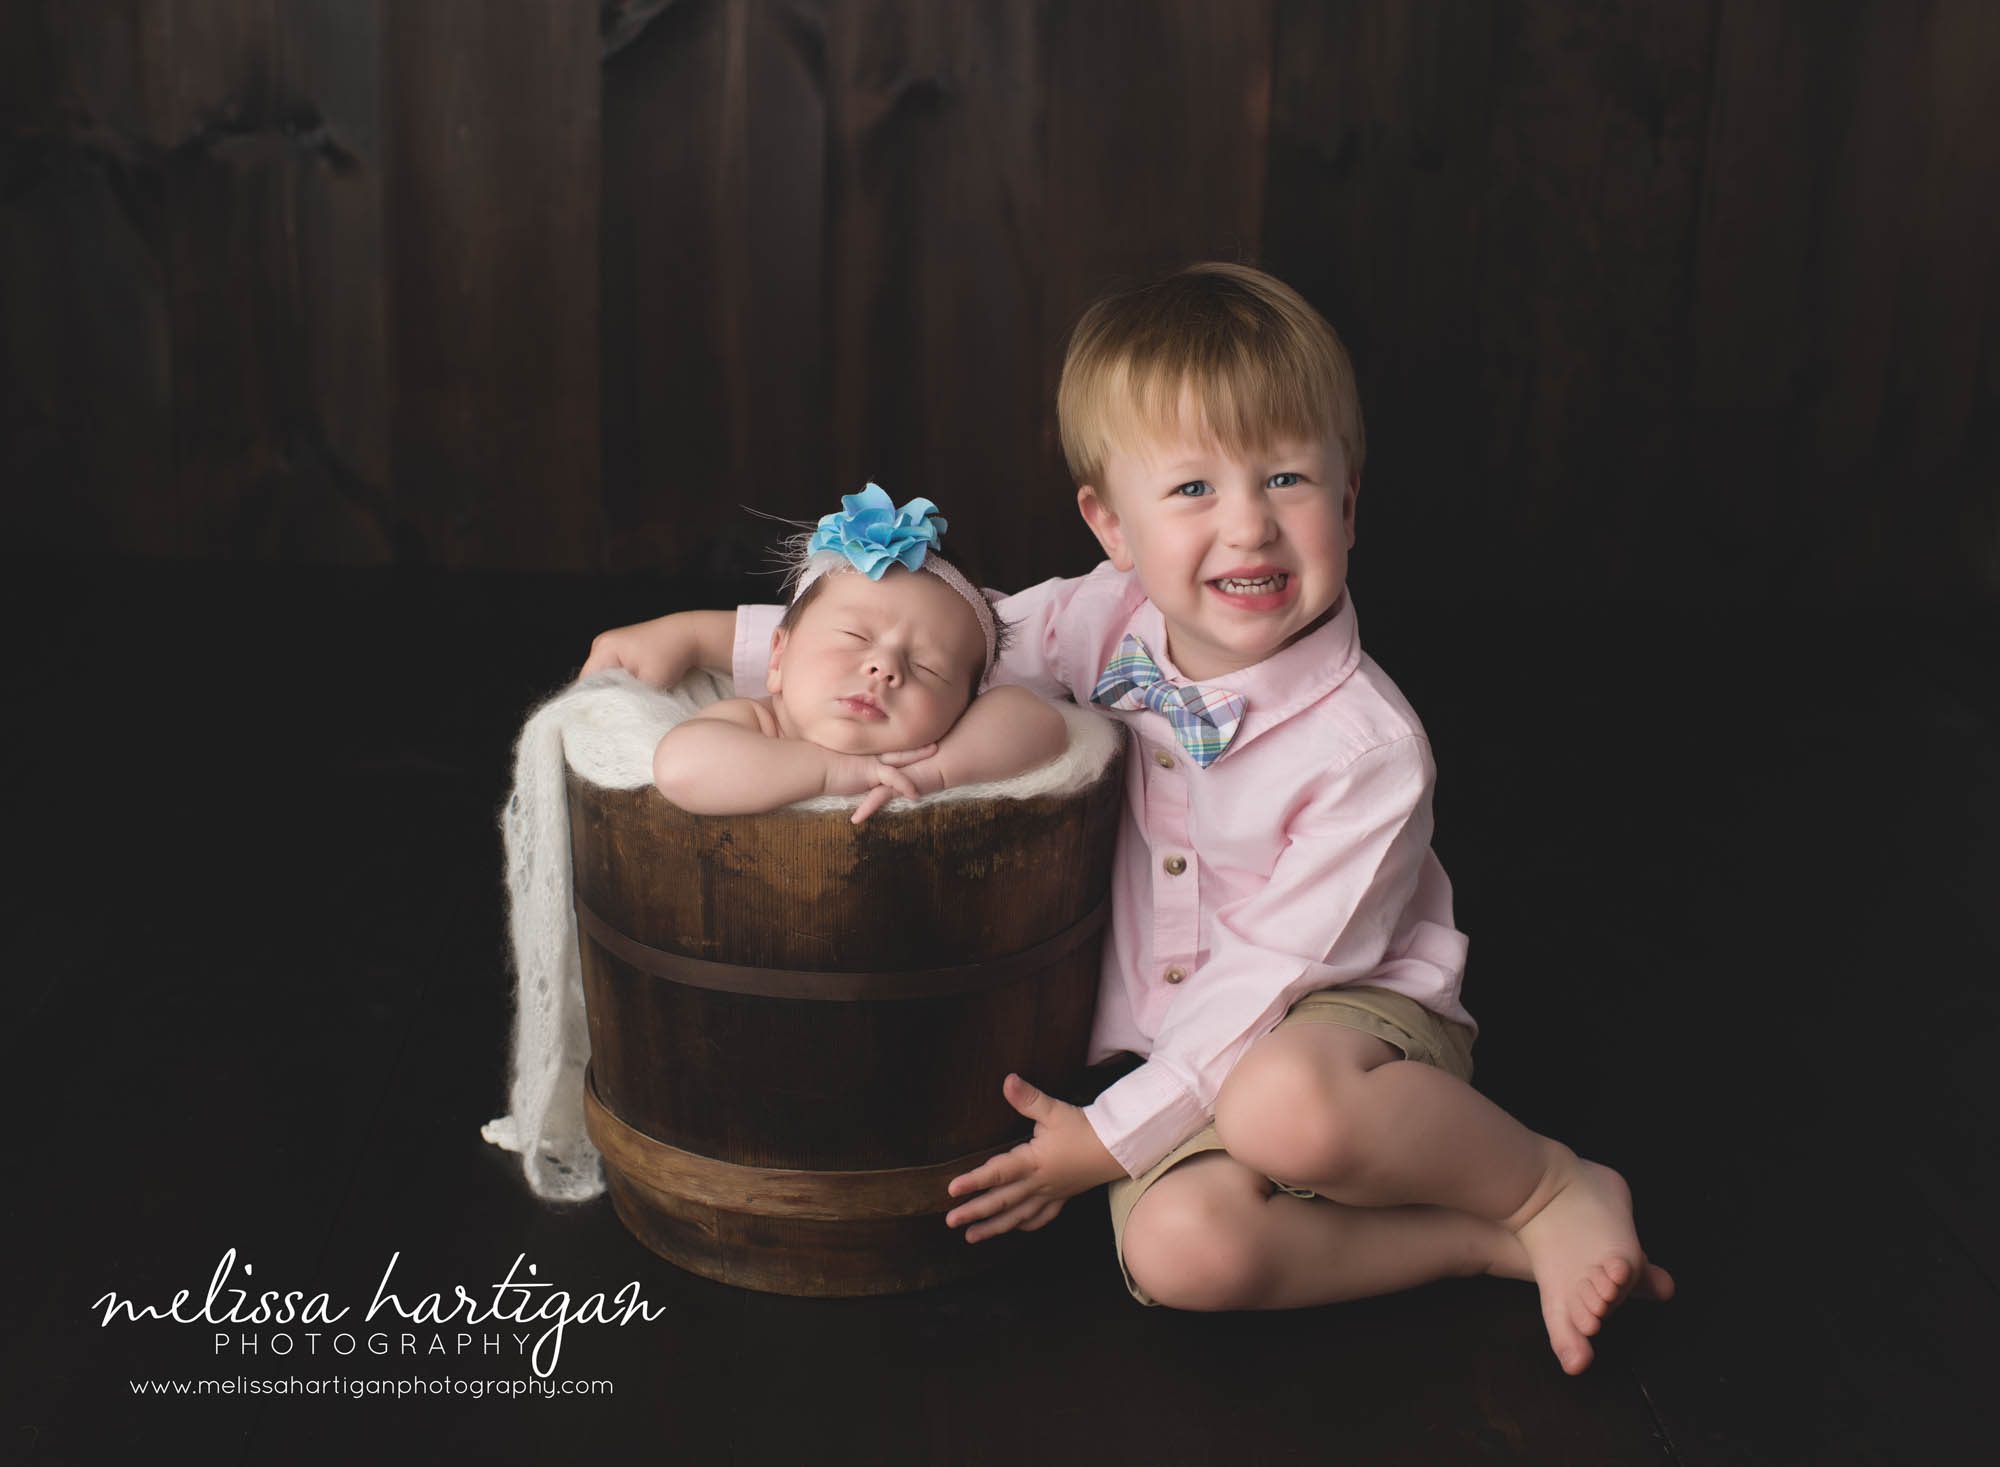 Melissa Hartigan Photography Connecticut Newborn Photographer Coventry Ct Middlefield CT baby Fairfield county Newborn and maternity photography Baby girl blue floral headband in wooden bucket with big brother posed next